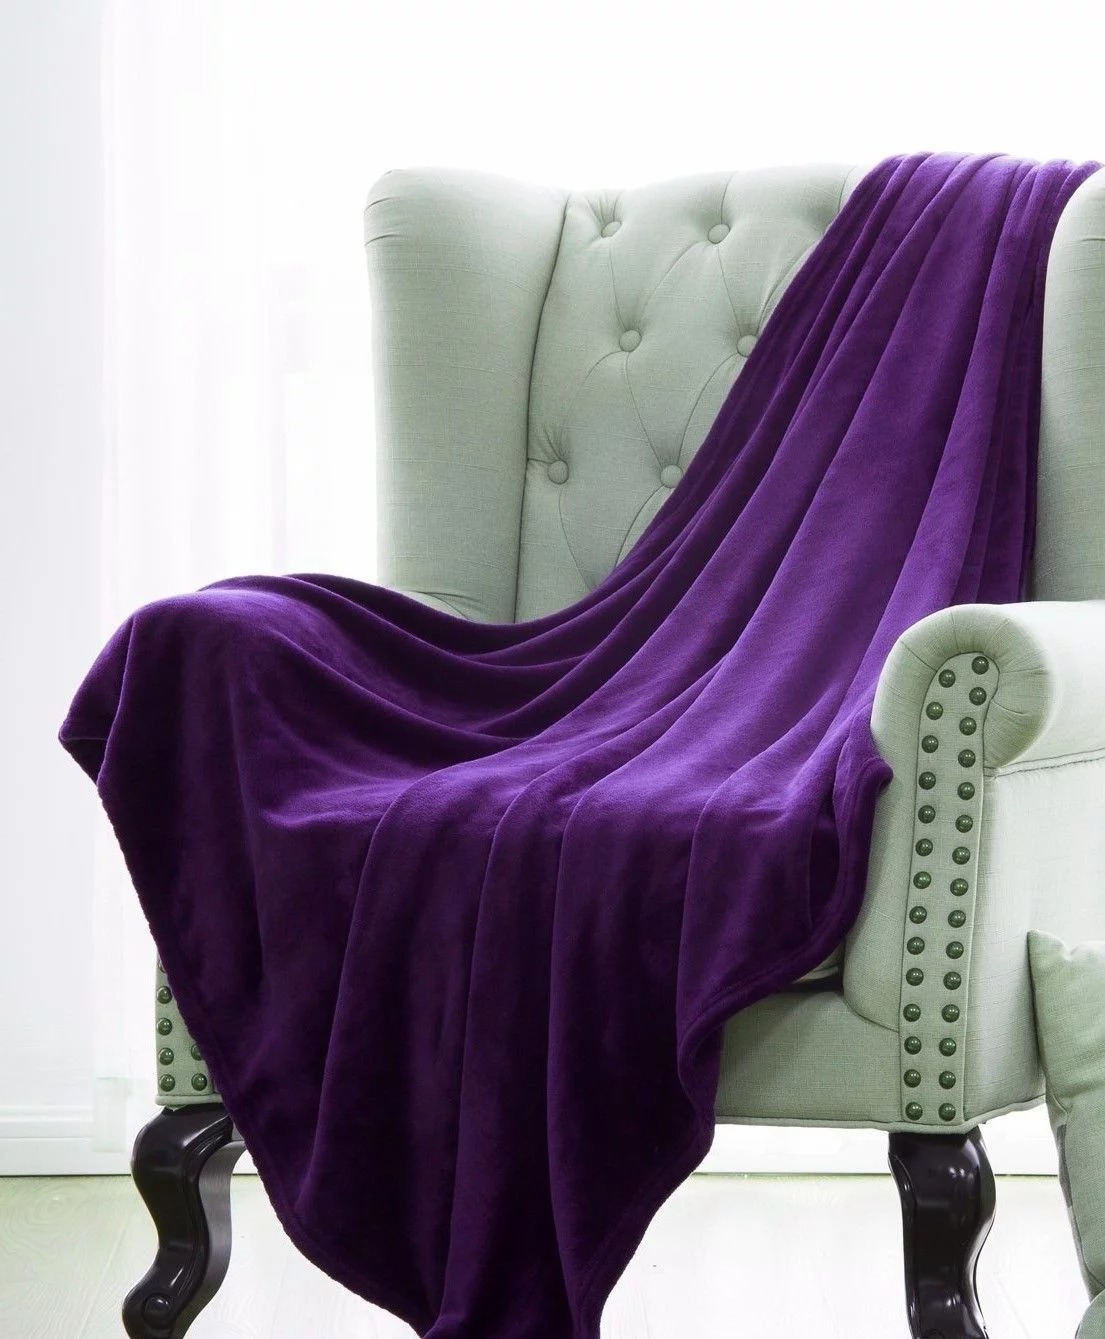 Blankets with a single coverall in purple